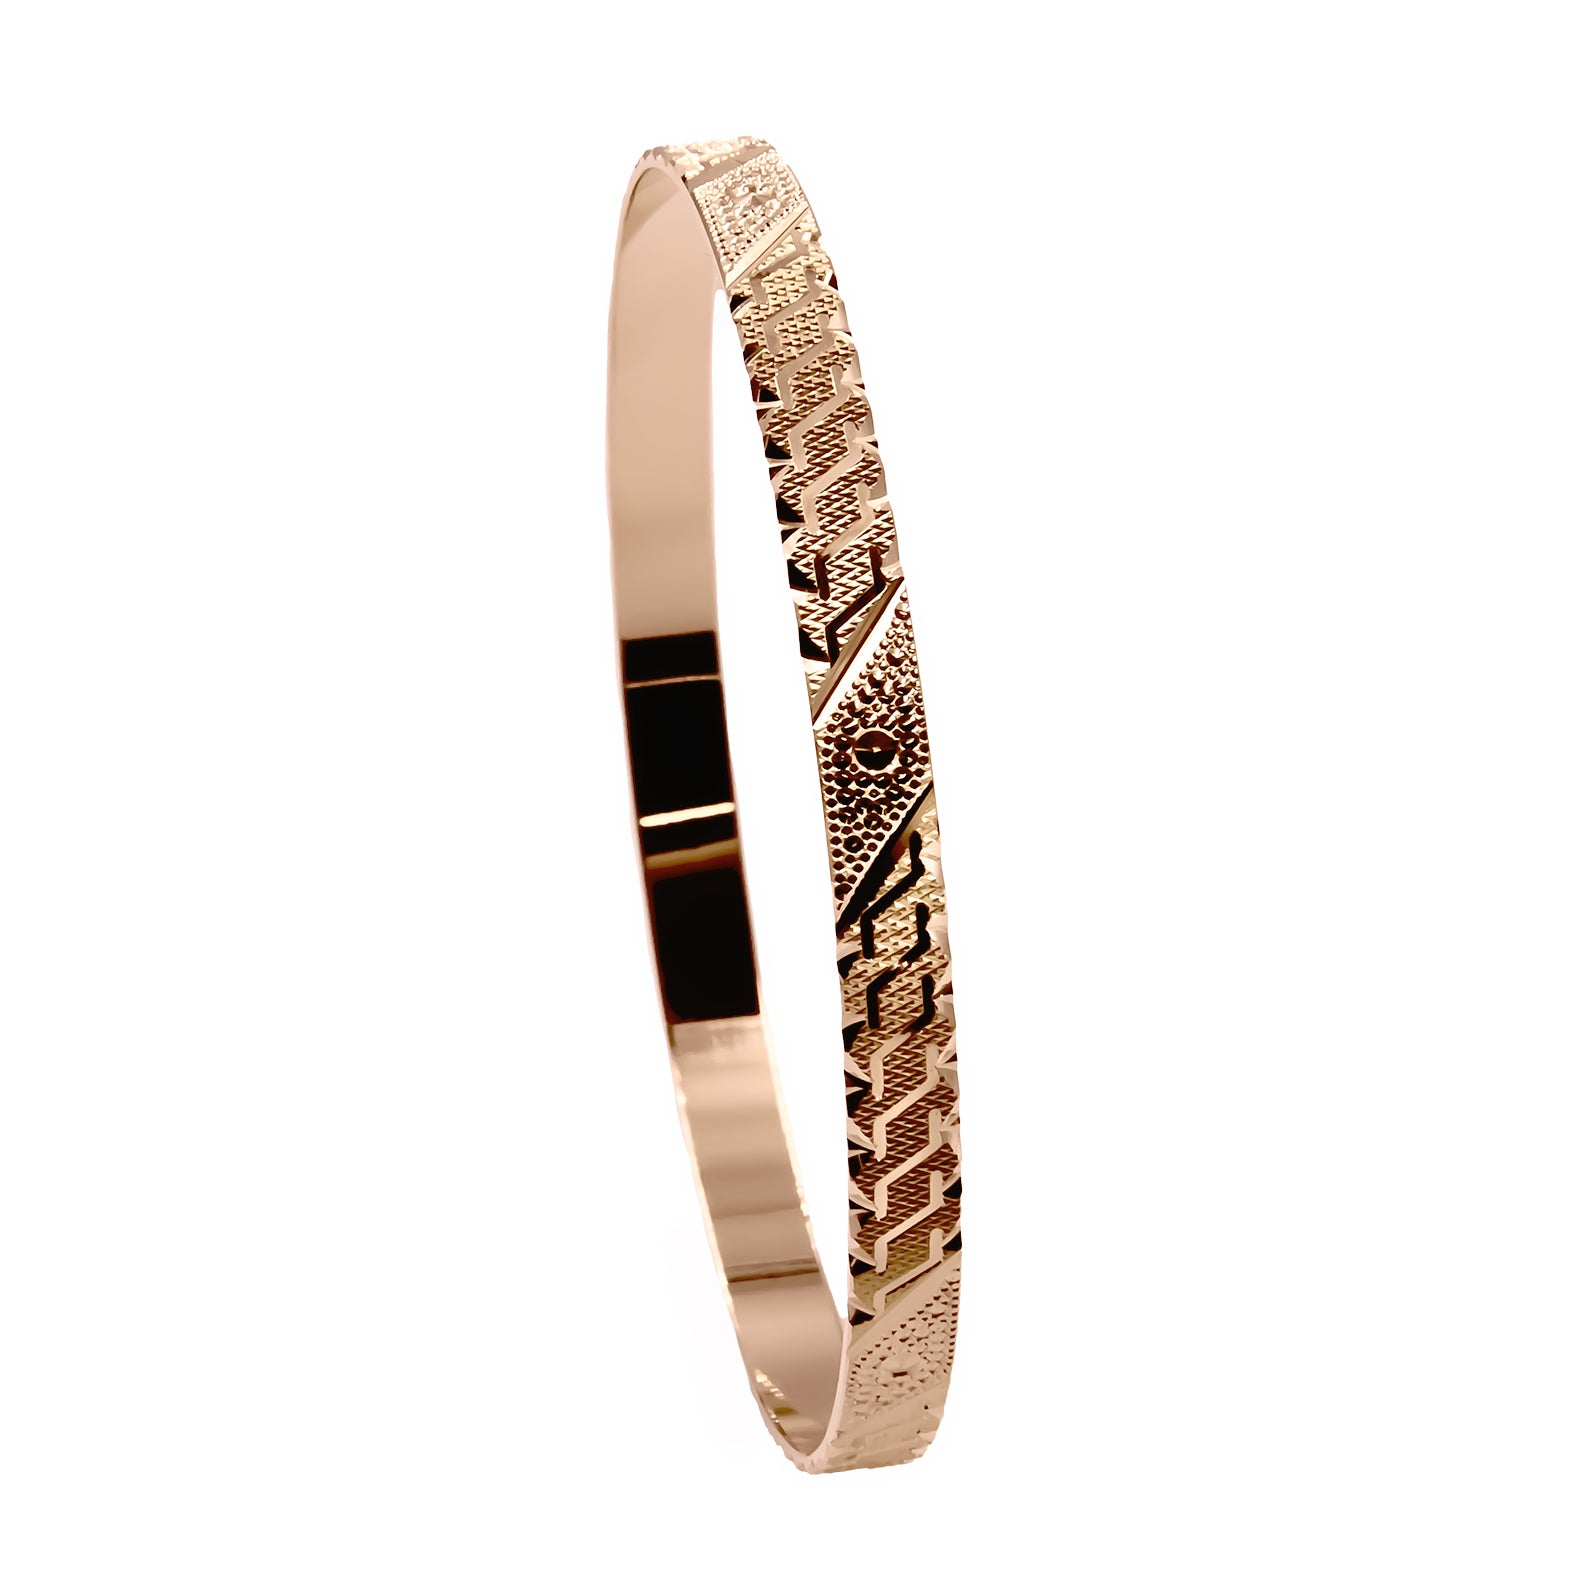 Bangle DIBBA 5mm tapestry red gold 18k 750